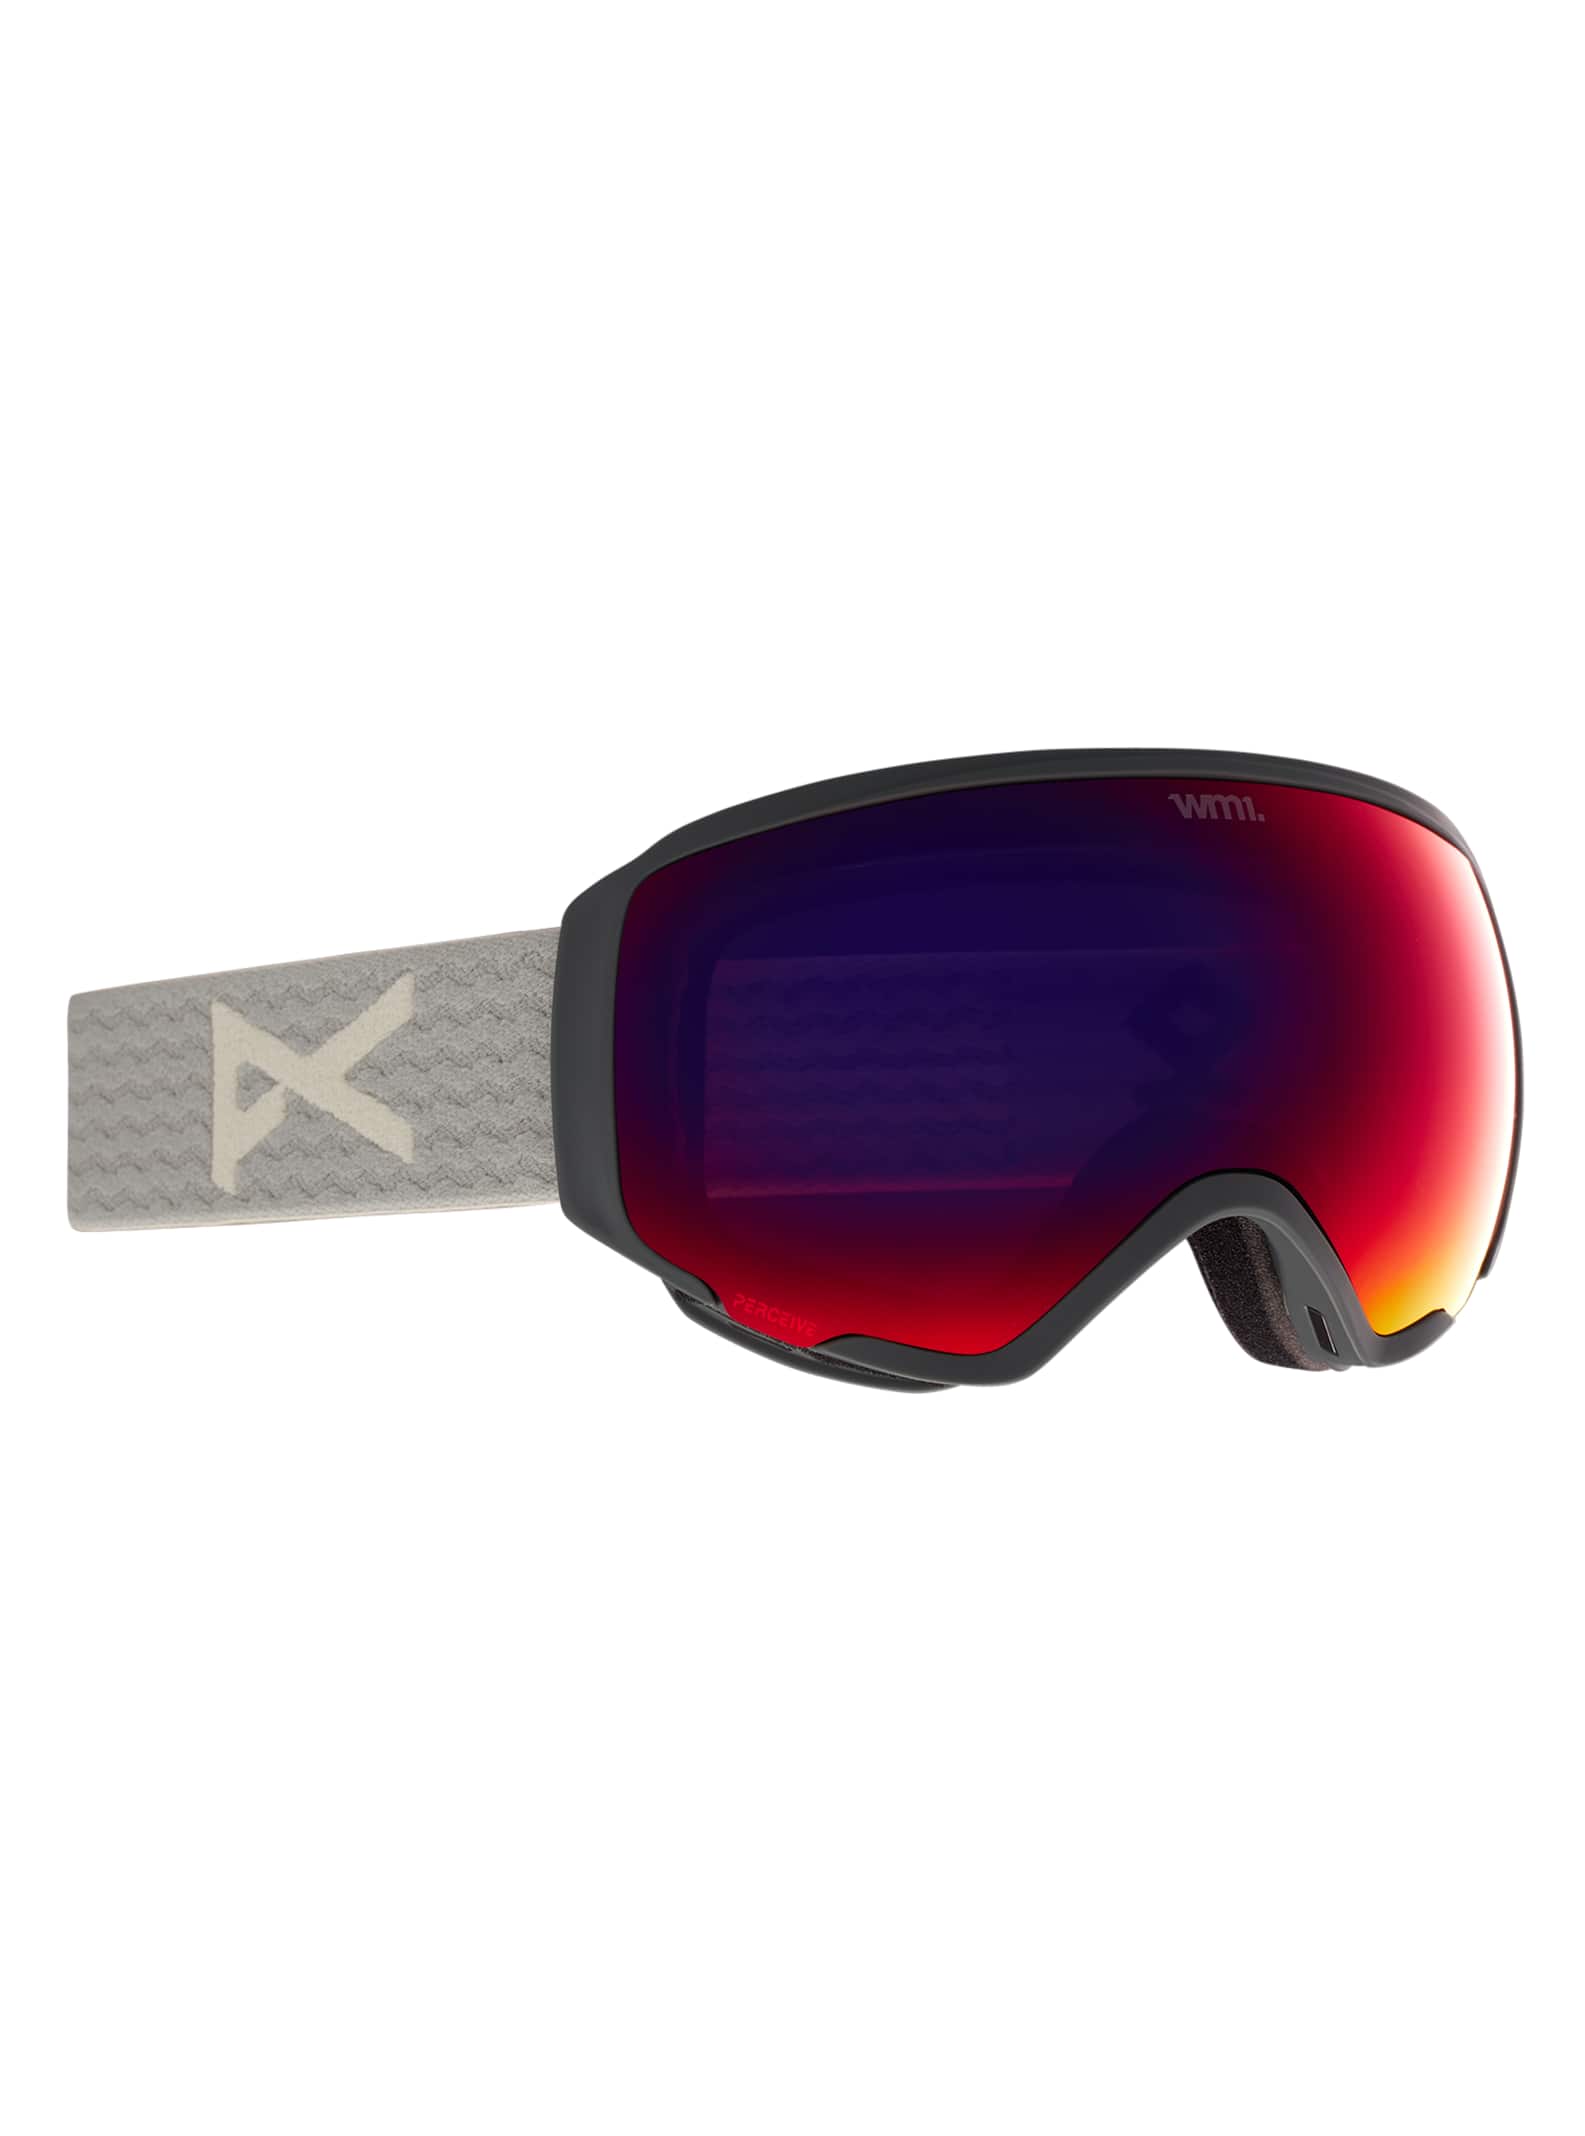 Anon Womens WM1 Goggle Asian Fit with Spare Lens and MFI Mask 